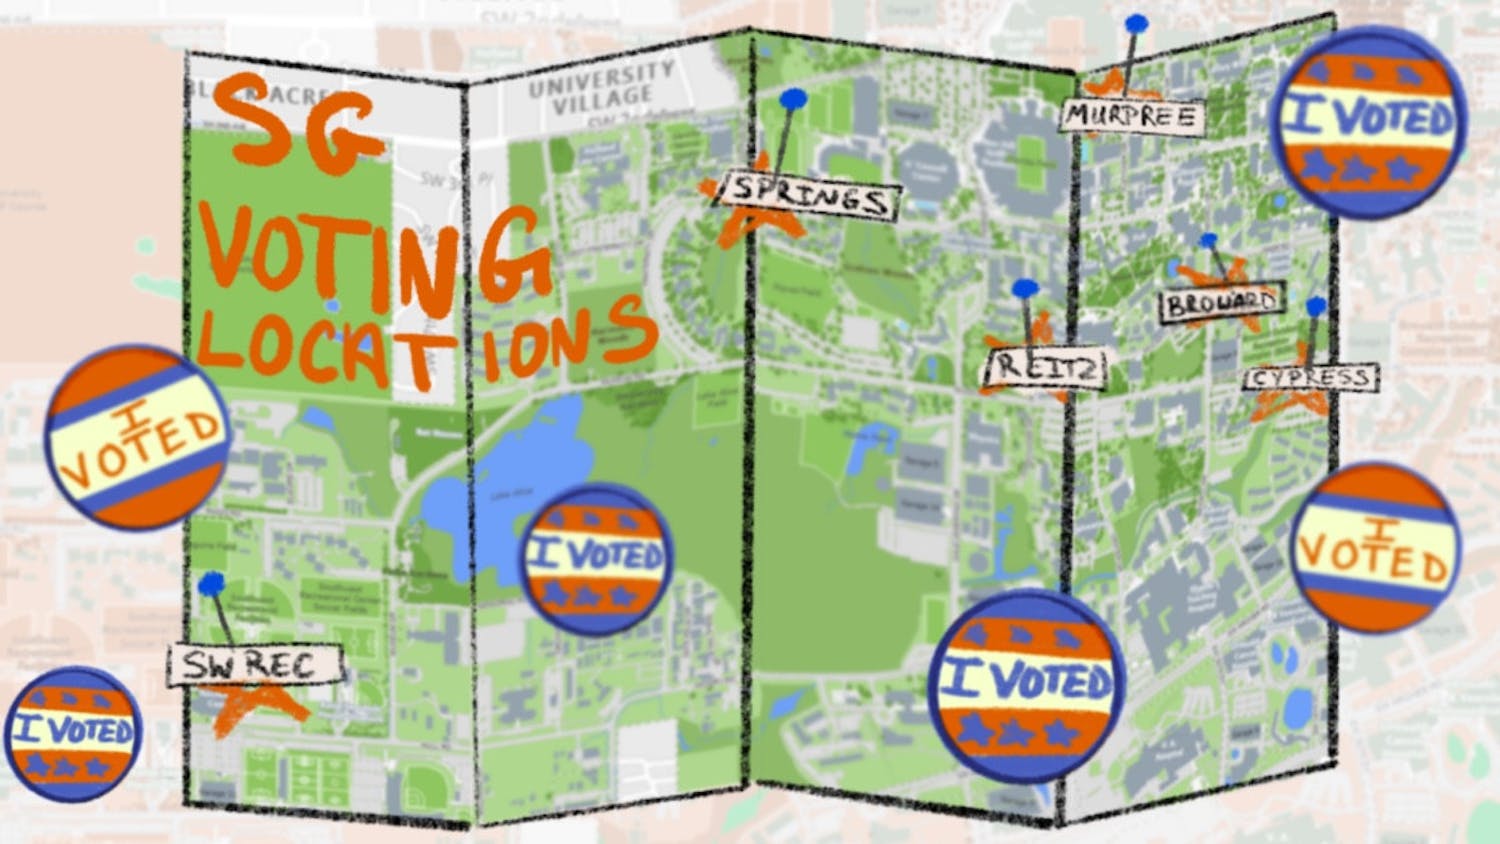 Spring 2021 Student Government Polling Locations